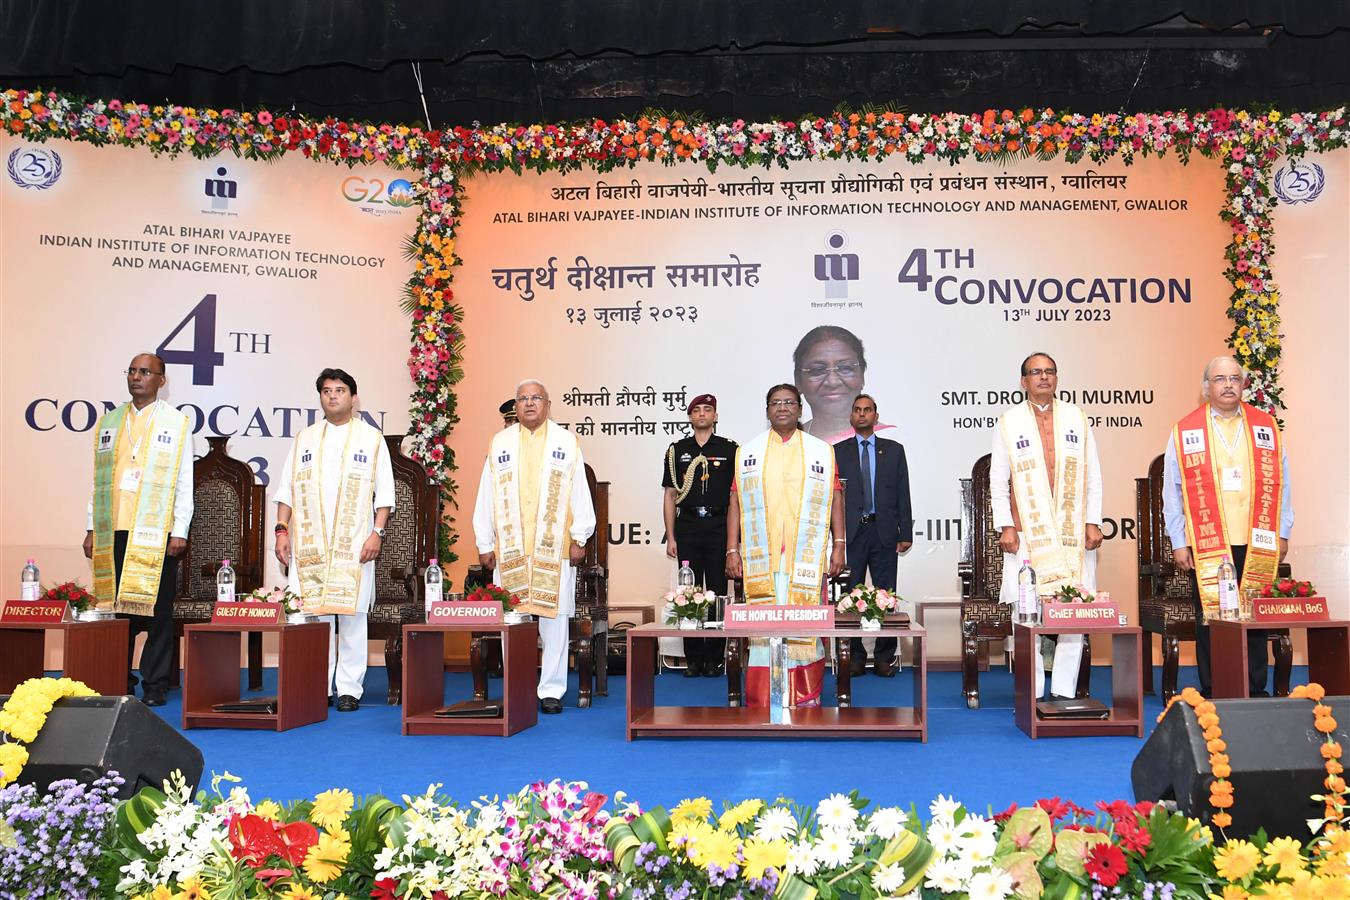 The President of India, Smt Droupadi Murmu graced and addressed the 4th convocation of Atal Bihari Vajpayee-Indian Institute of Information Technology and Management (ABV-IIITM) at Gwalior, Madhya Pradesh on July 13, 2023.